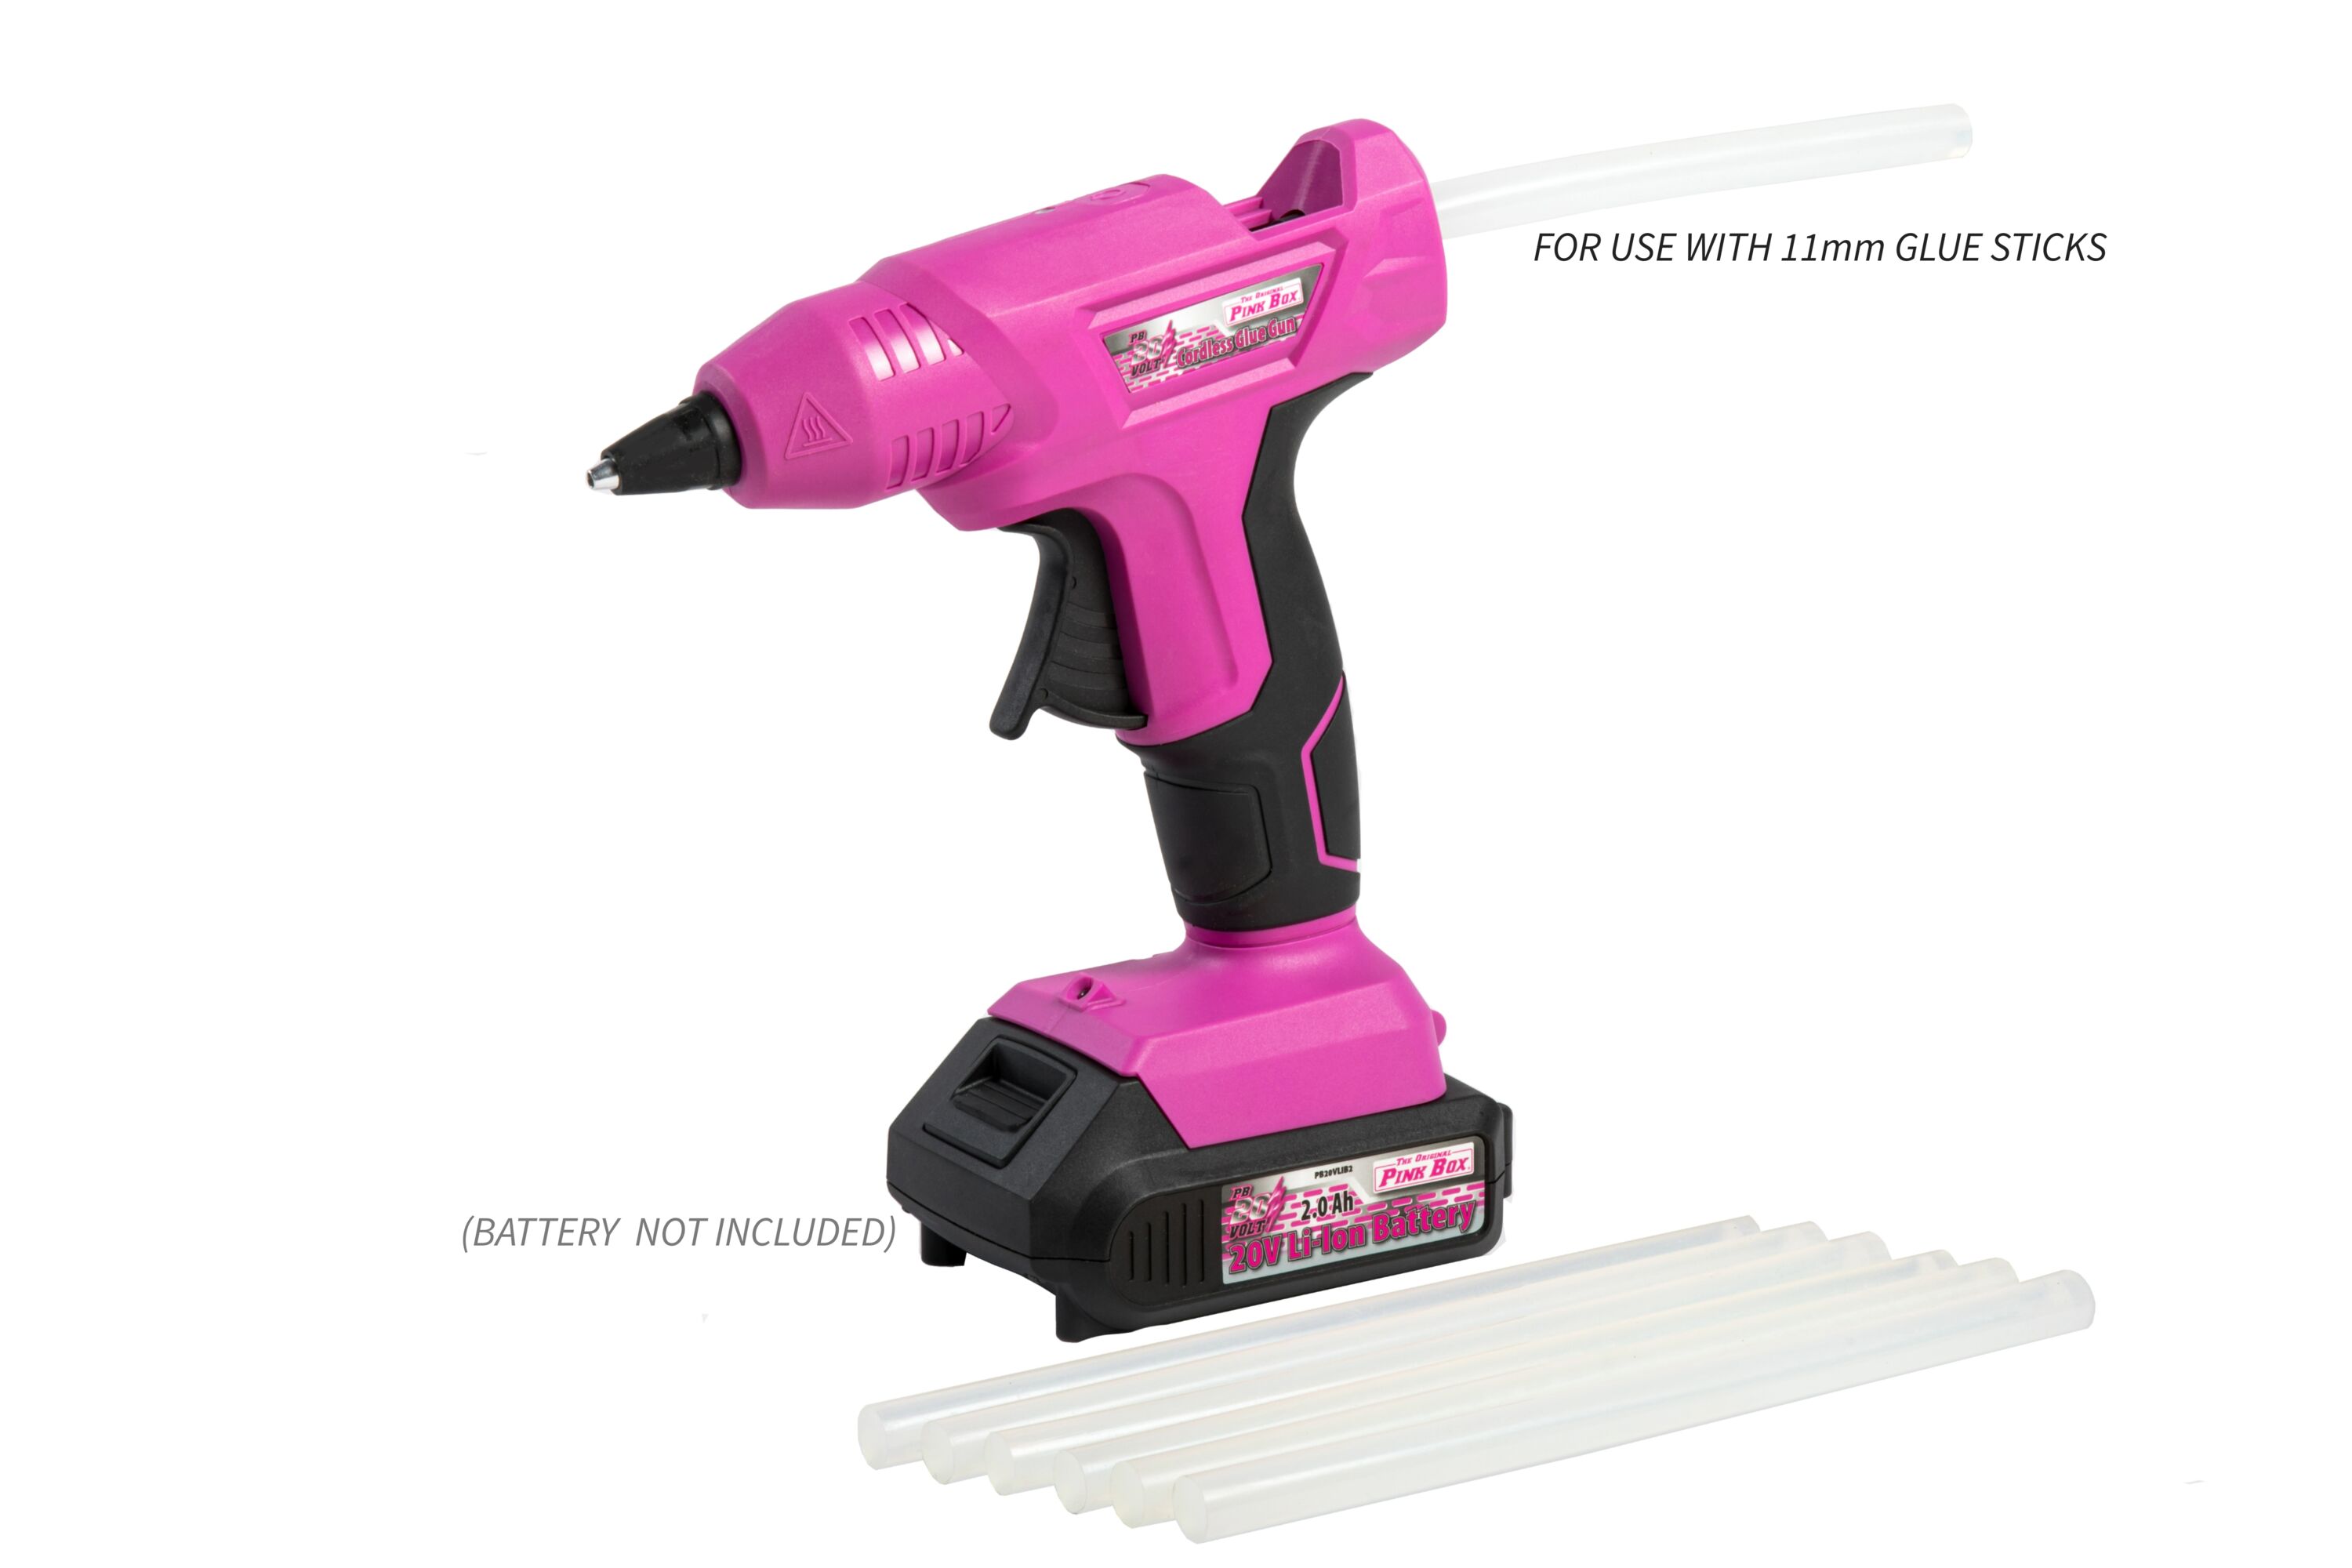 Check out my new PINK Glue Gun: FT: @ChandlerTools 